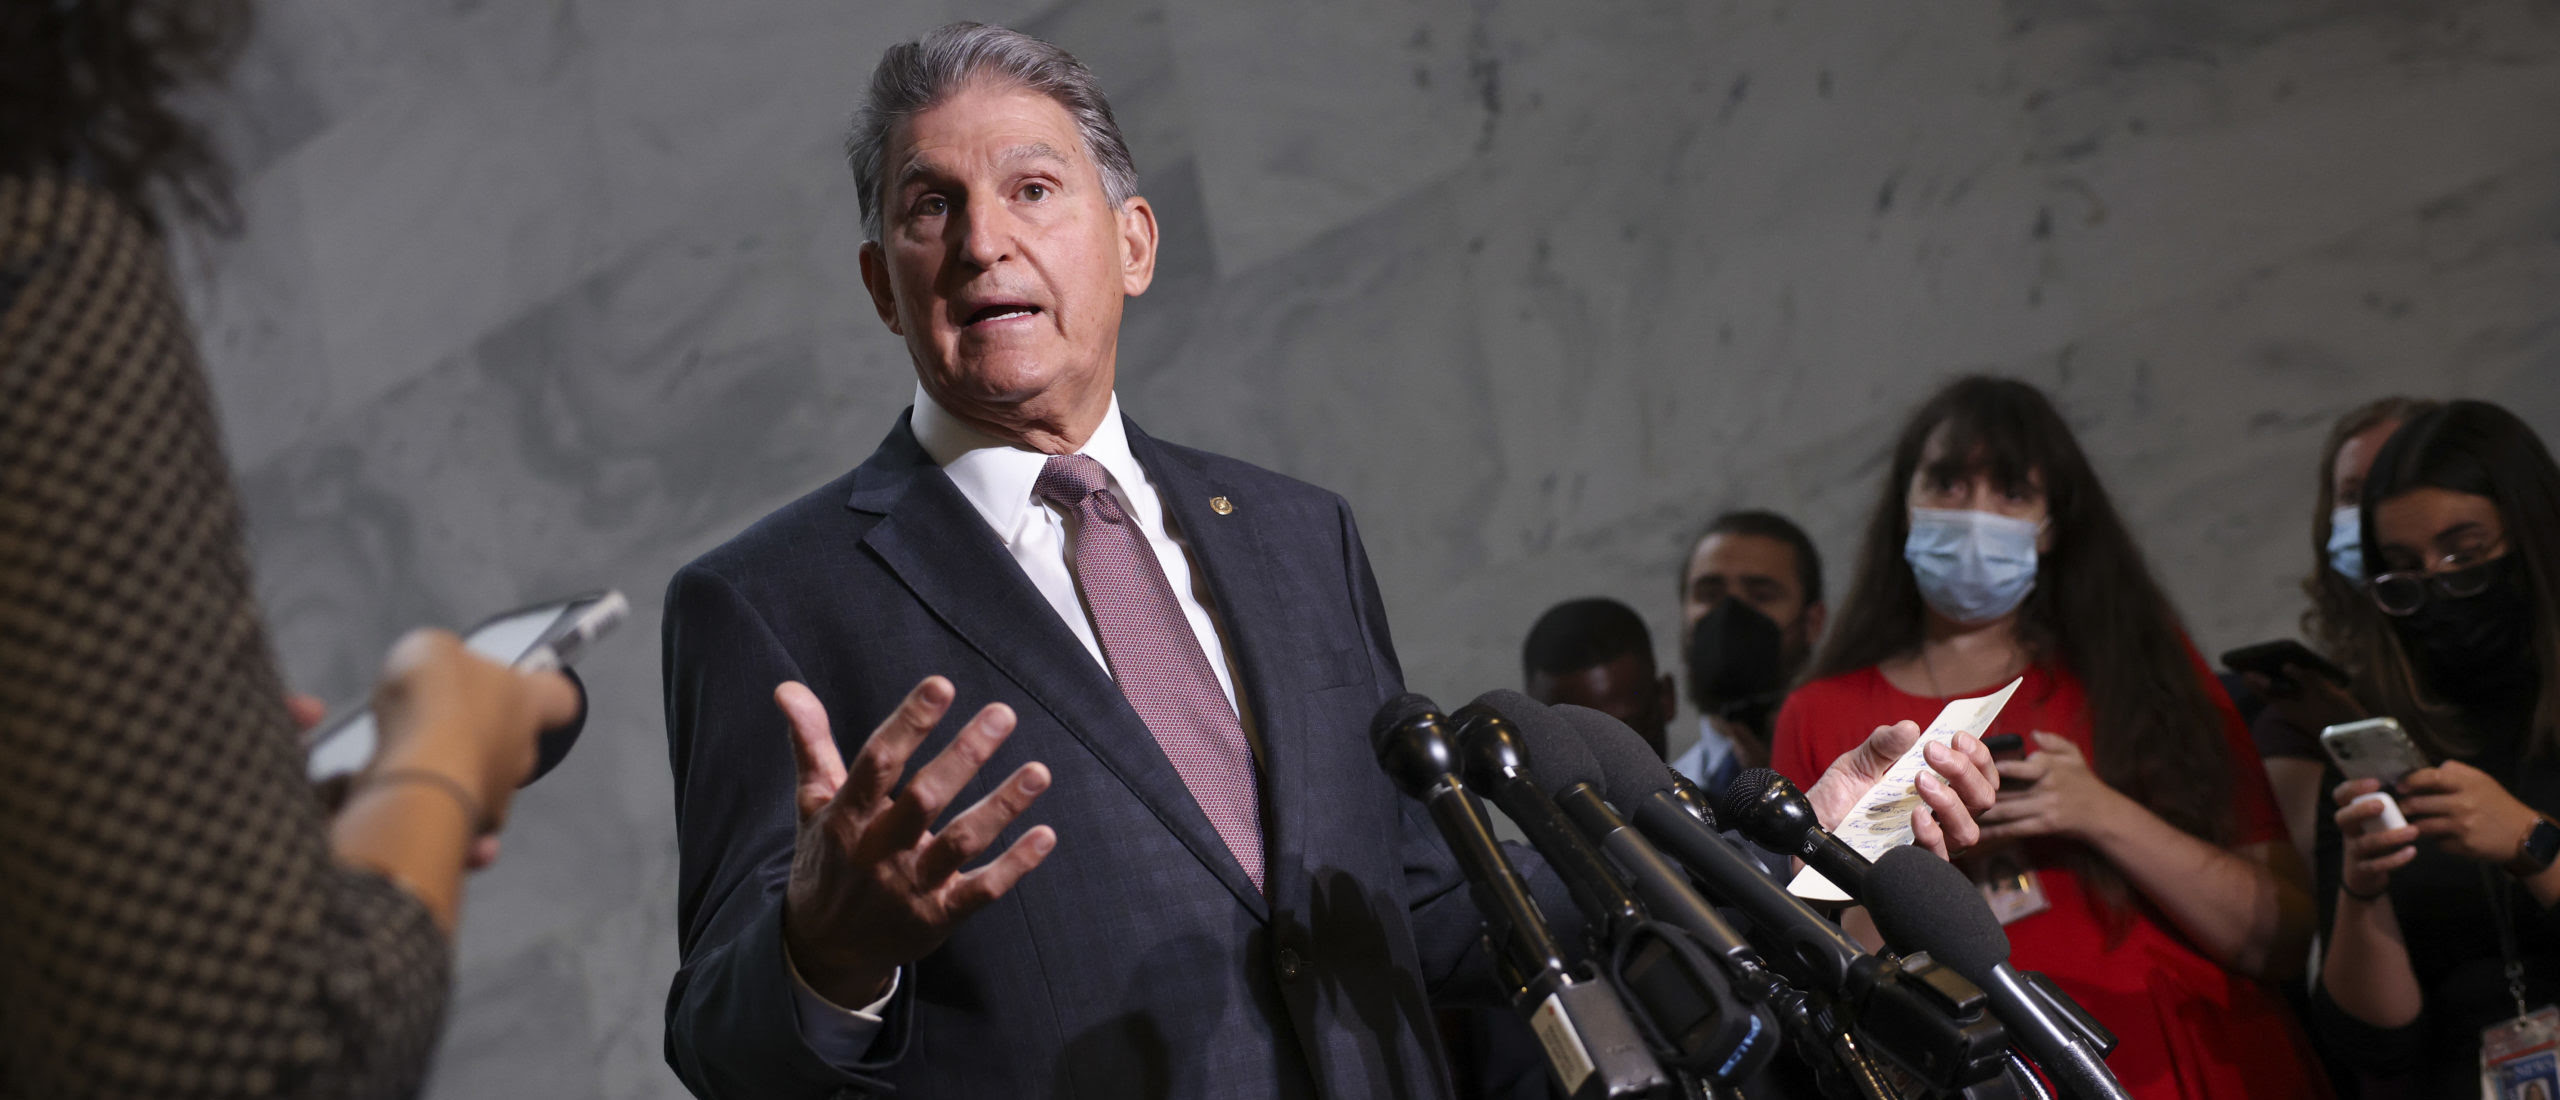 ‘Get Serious’: Manchin Says ‘Severe Economic Pain’ Cannot Be ‘Ignored’